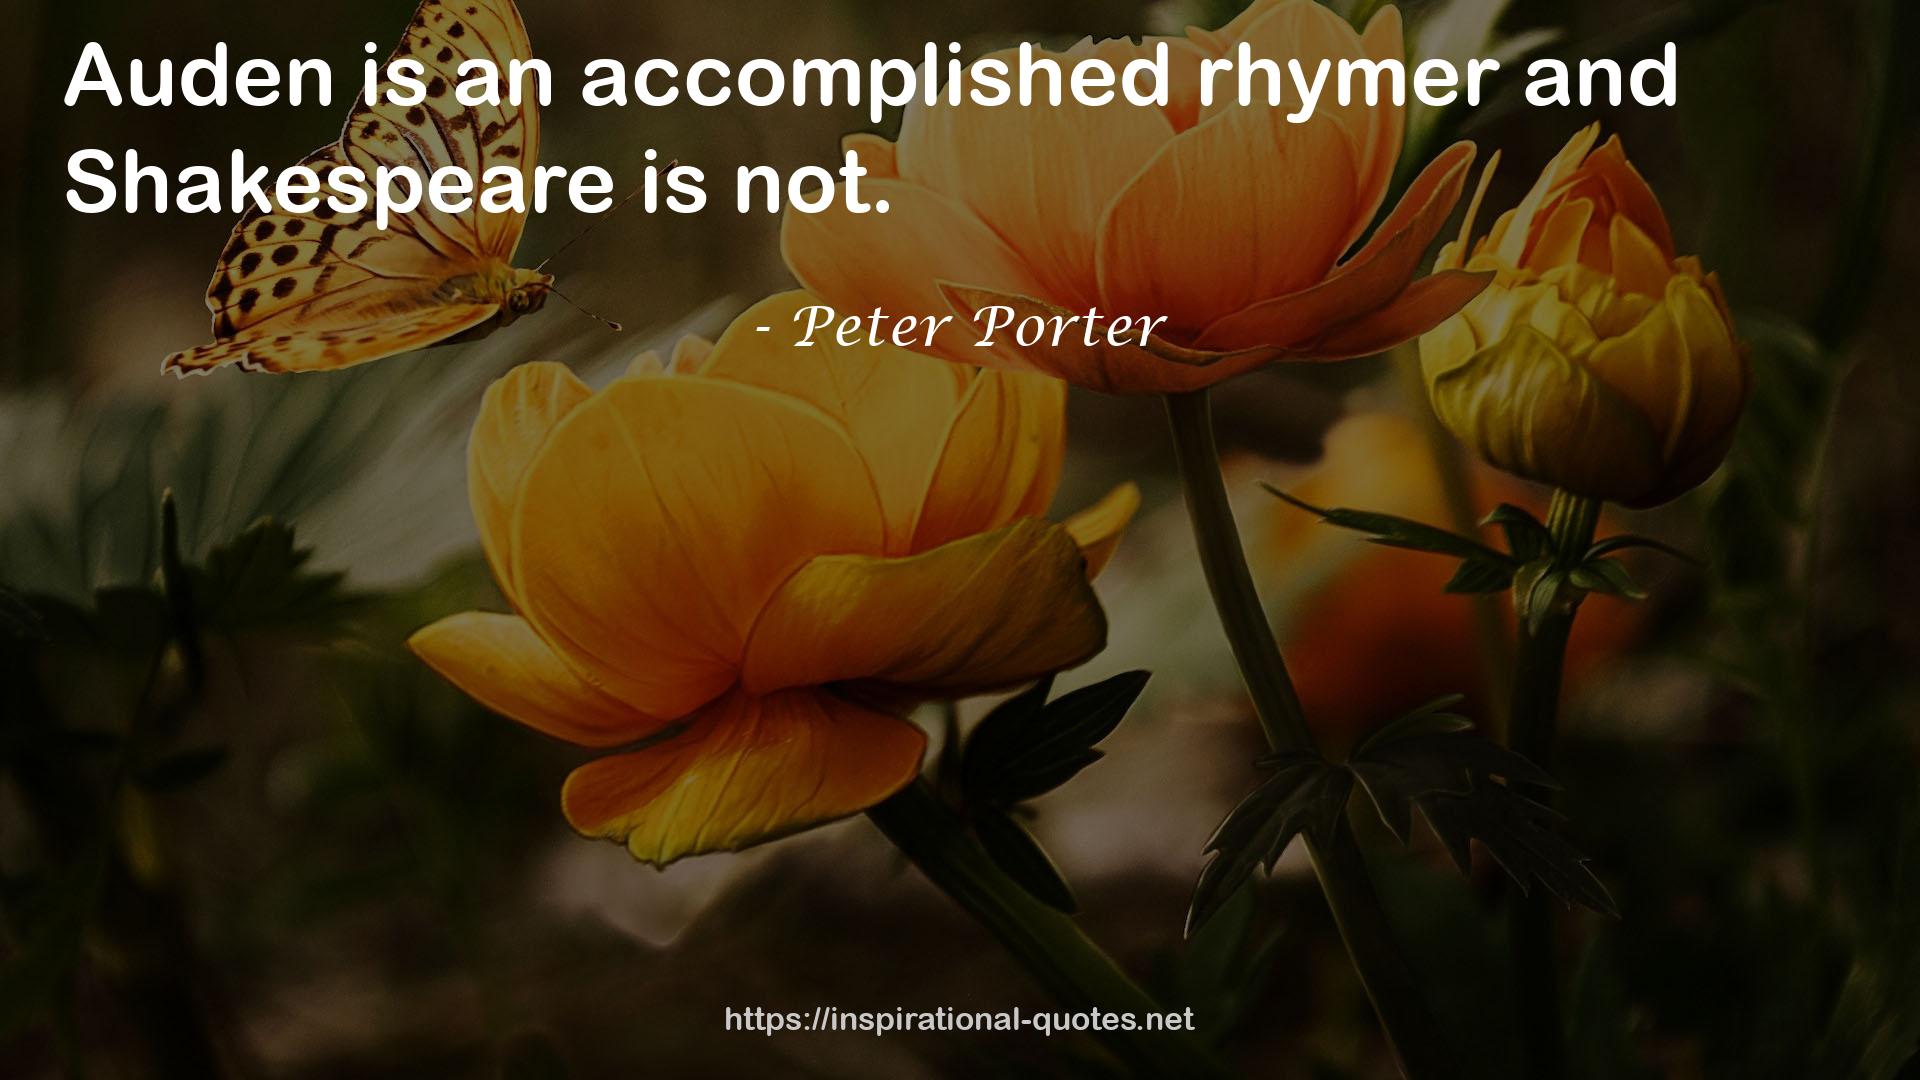 Peter Porter QUOTES